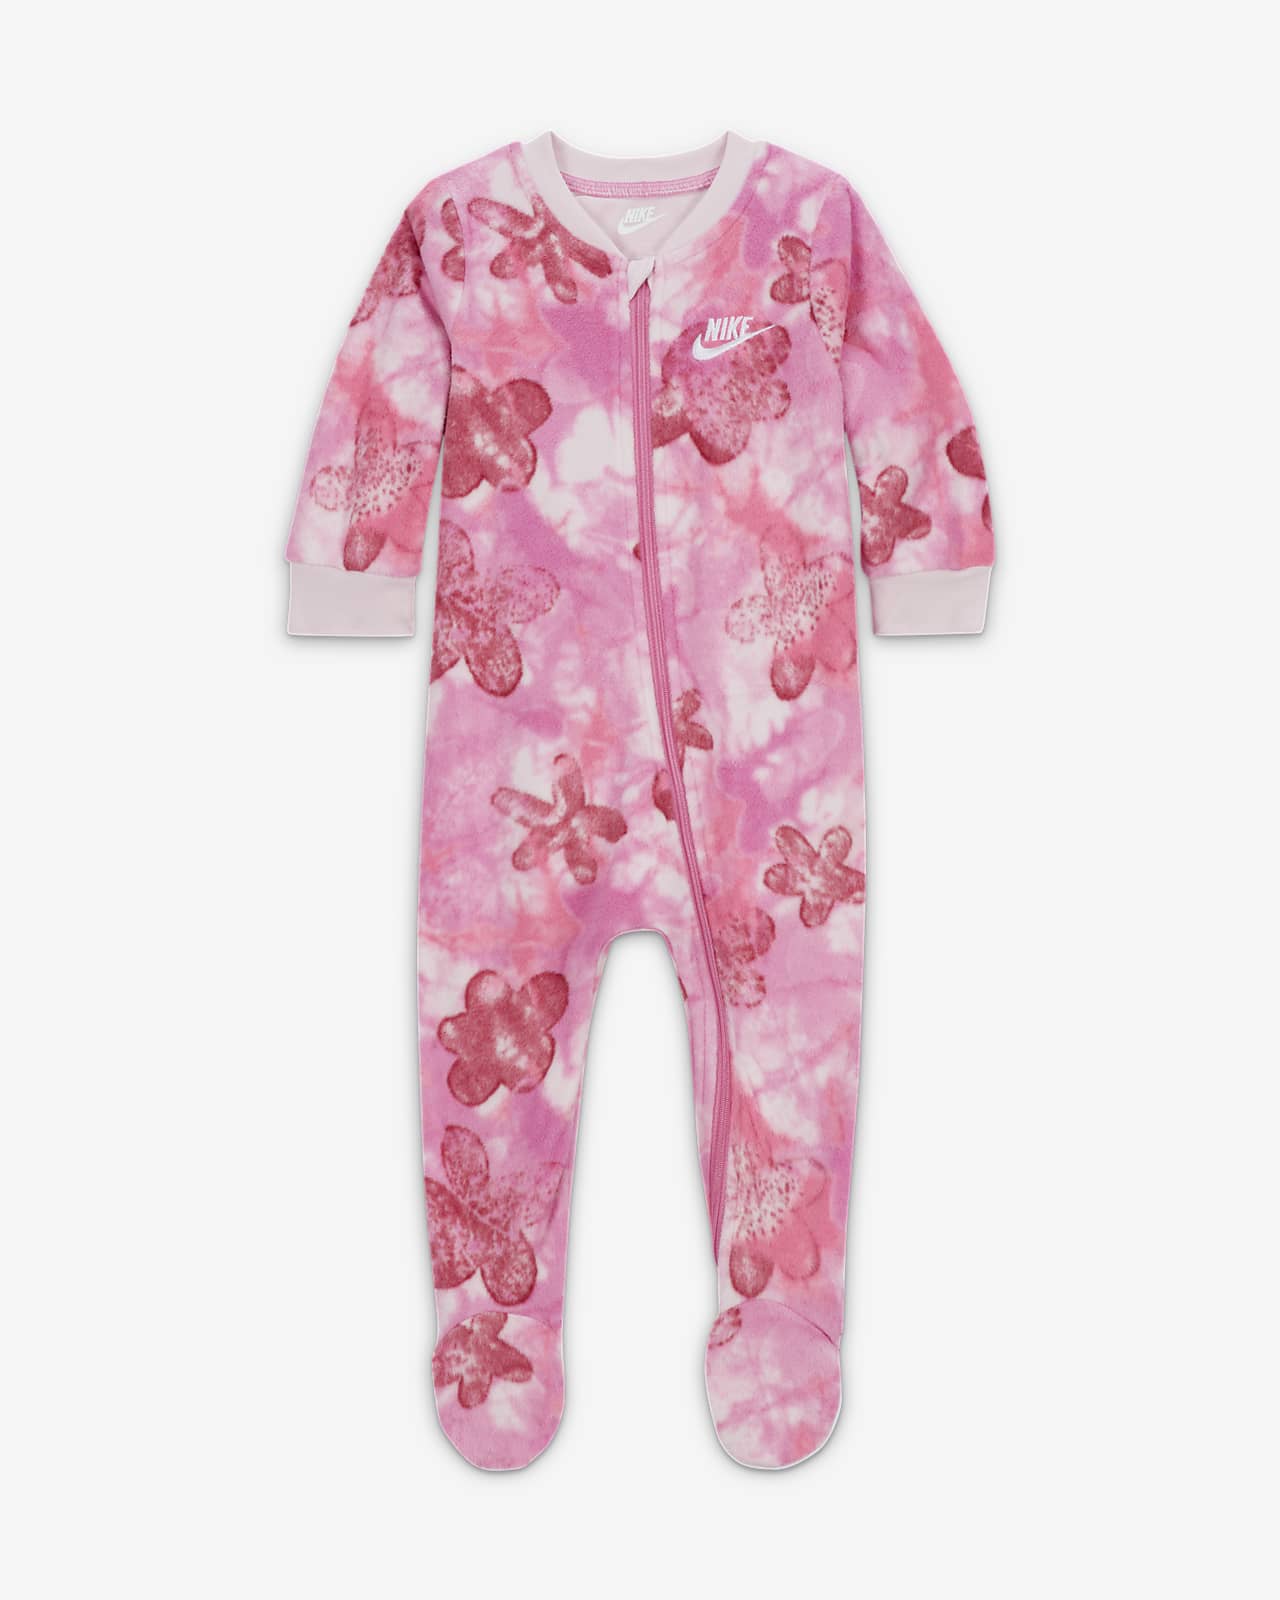 Baby Sci-Dye Coverall Club Nike Coverall.